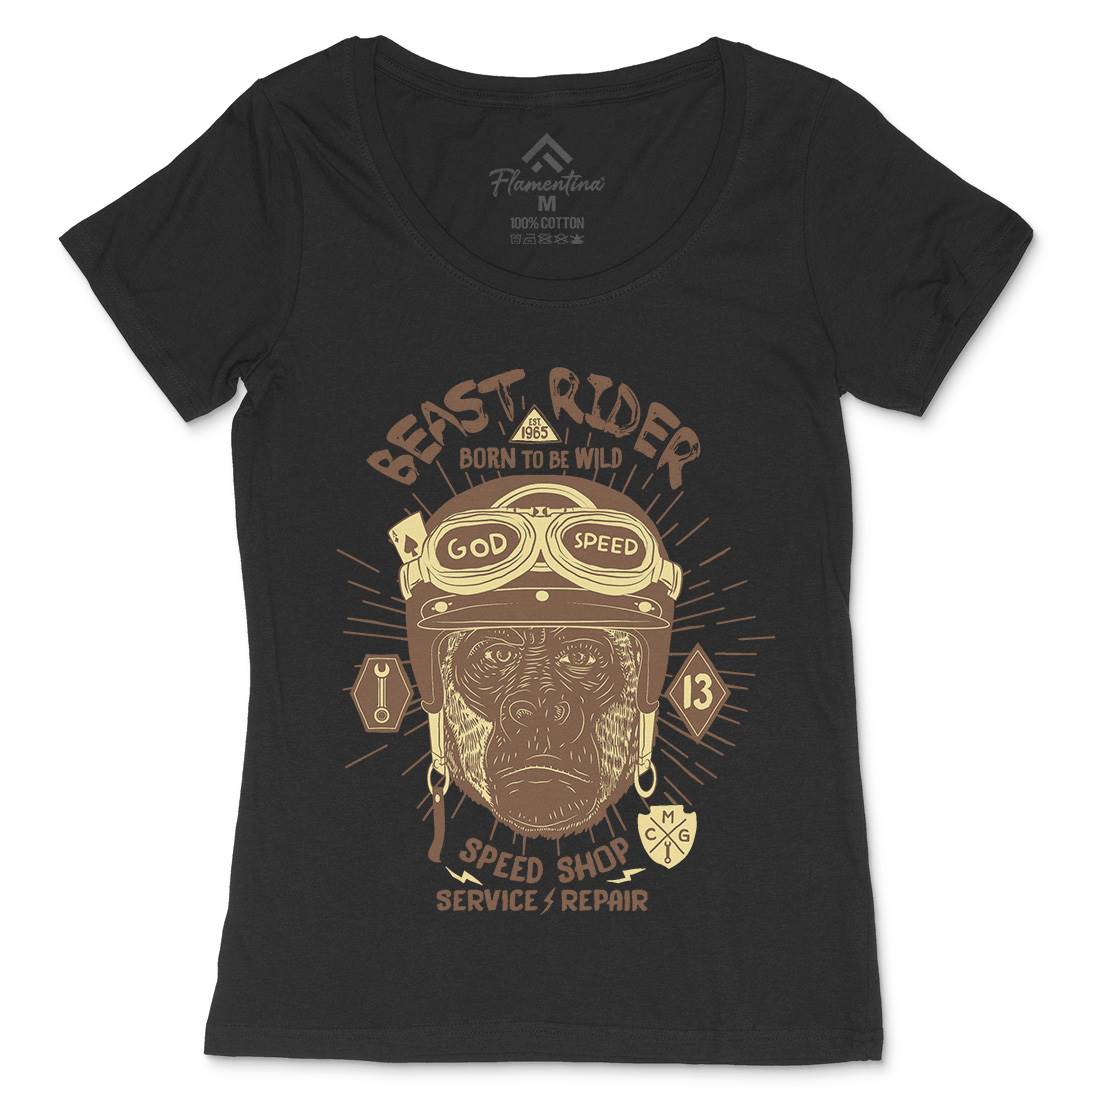 Beast Rider Womens Scoop Neck T-Shirt Motorcycles A994